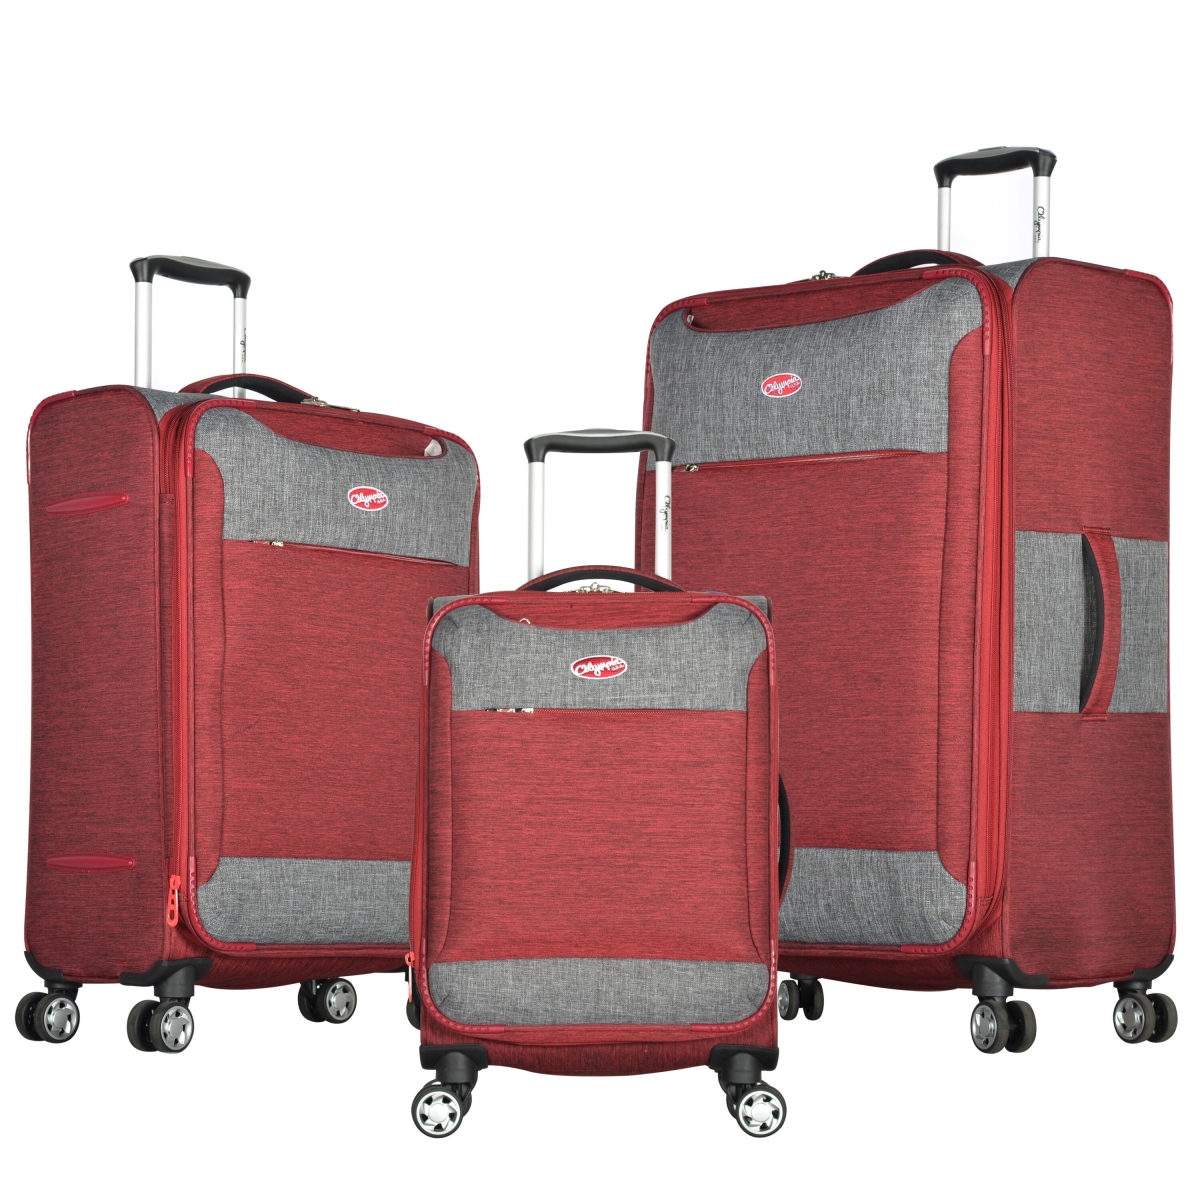 Picture of Olympia USA OE-2800-3-RD Denim Expandable Spinner Luggage Set - Red, 3 Piece